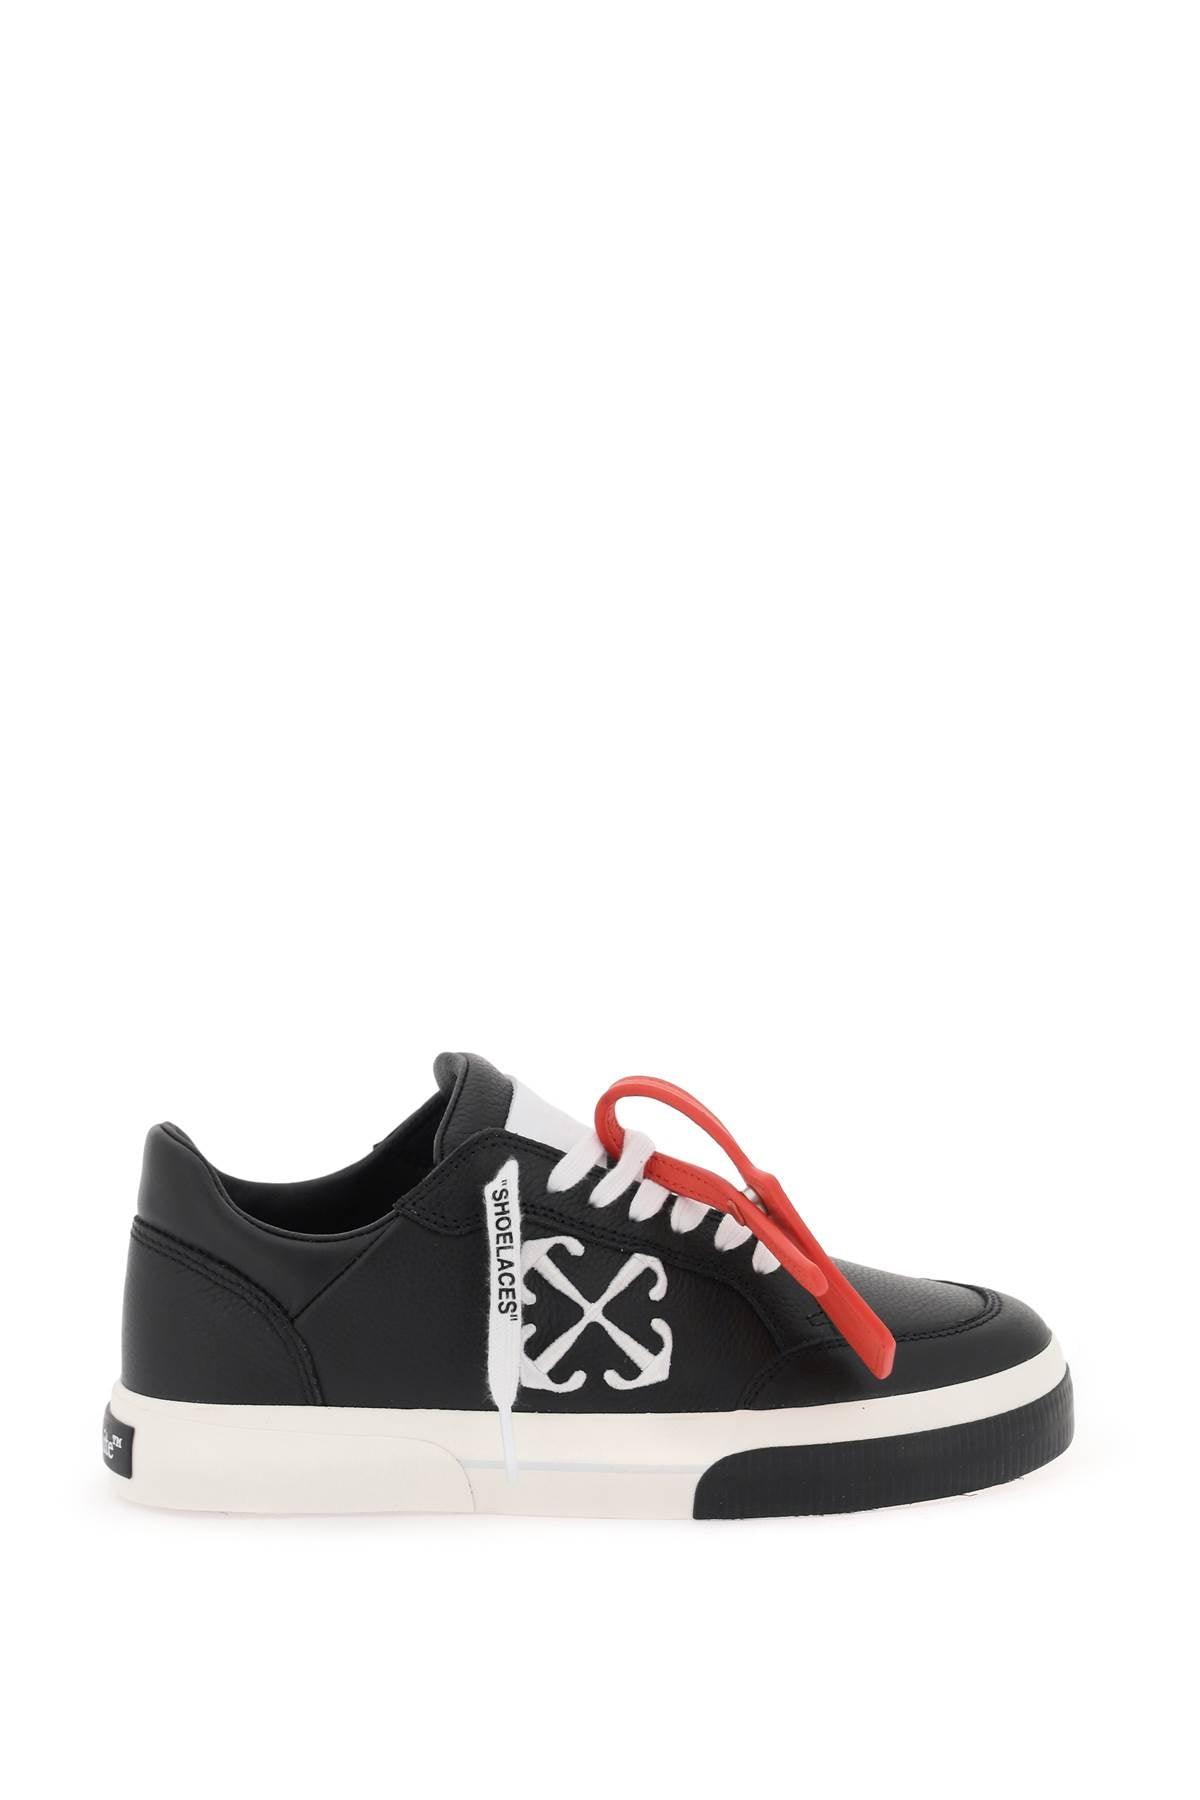 Off White Low Leather Vulcanized Sneakers For - JOHN JULIA